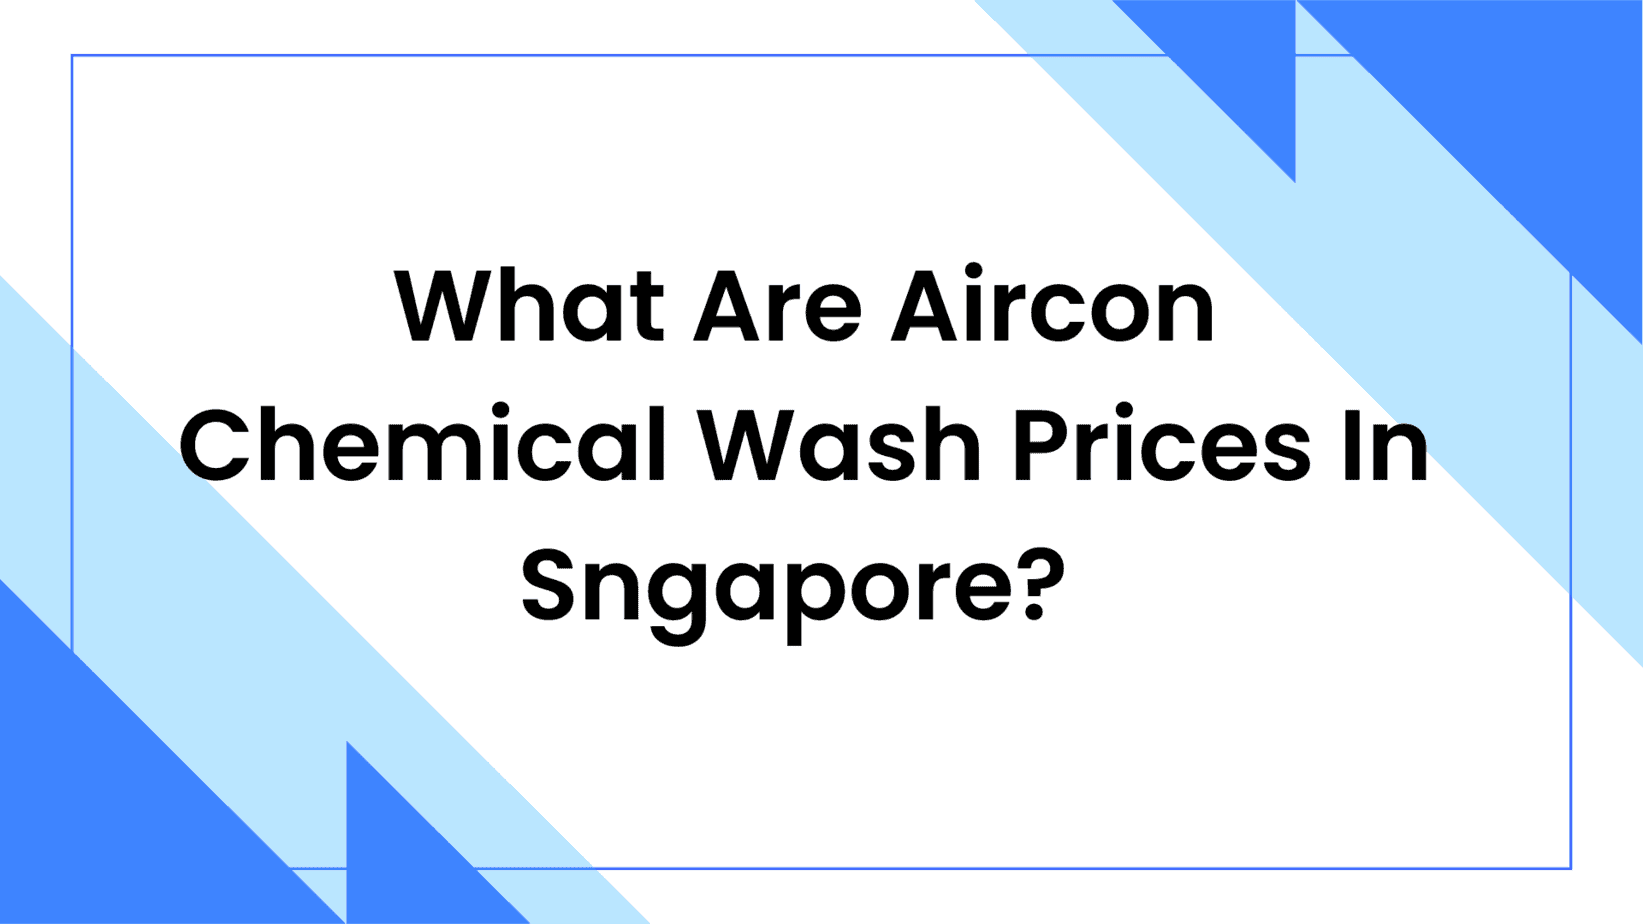 Aircon Chemical Wash Price